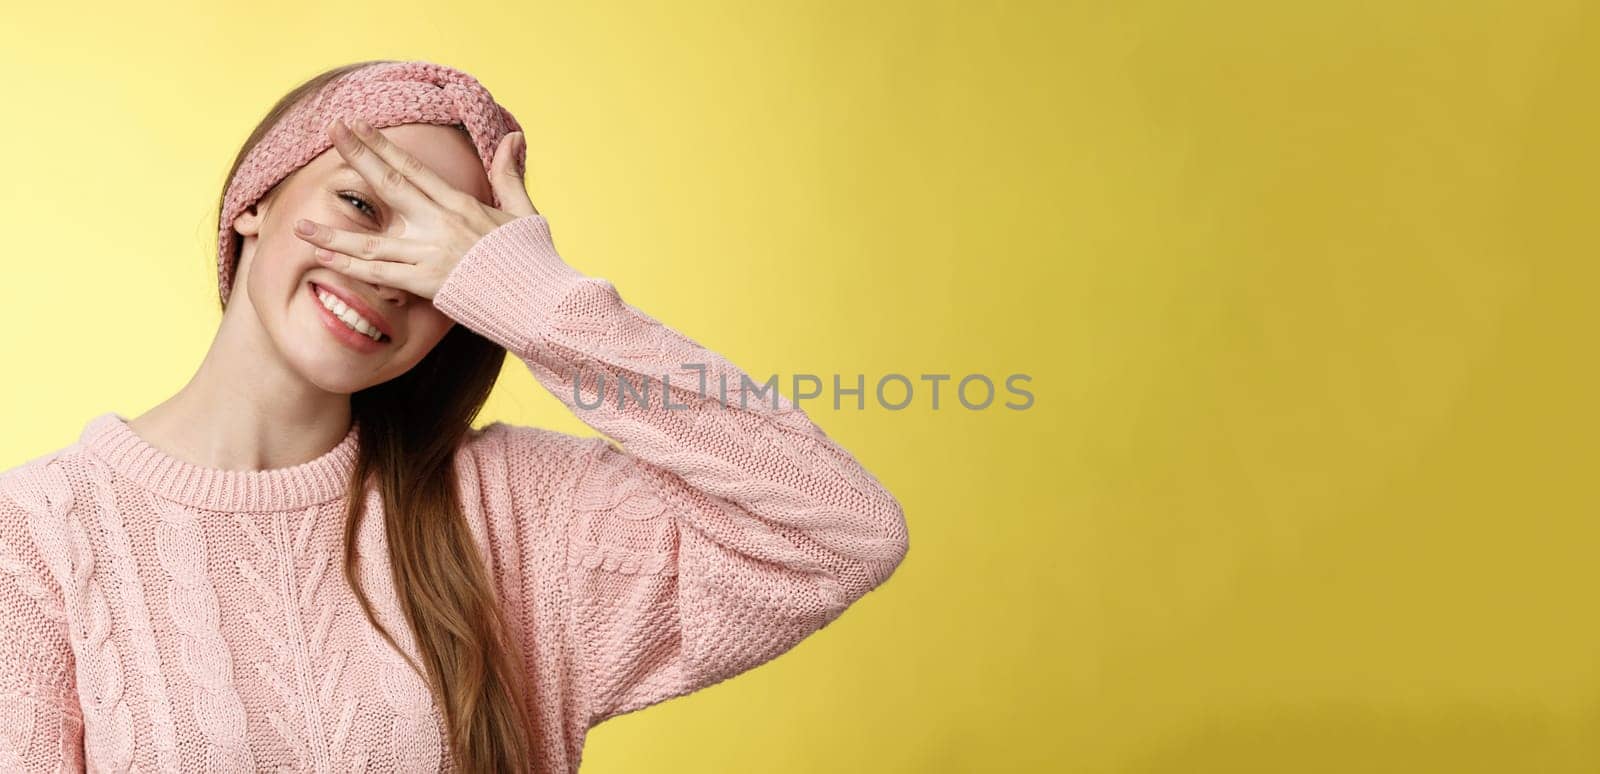 Blushing cute girl feeling positive, smiling happy joyful covering eyes with palm peeking through fingers delighted, playful, tilting head tender and lovely gazing at camera against yellow background.